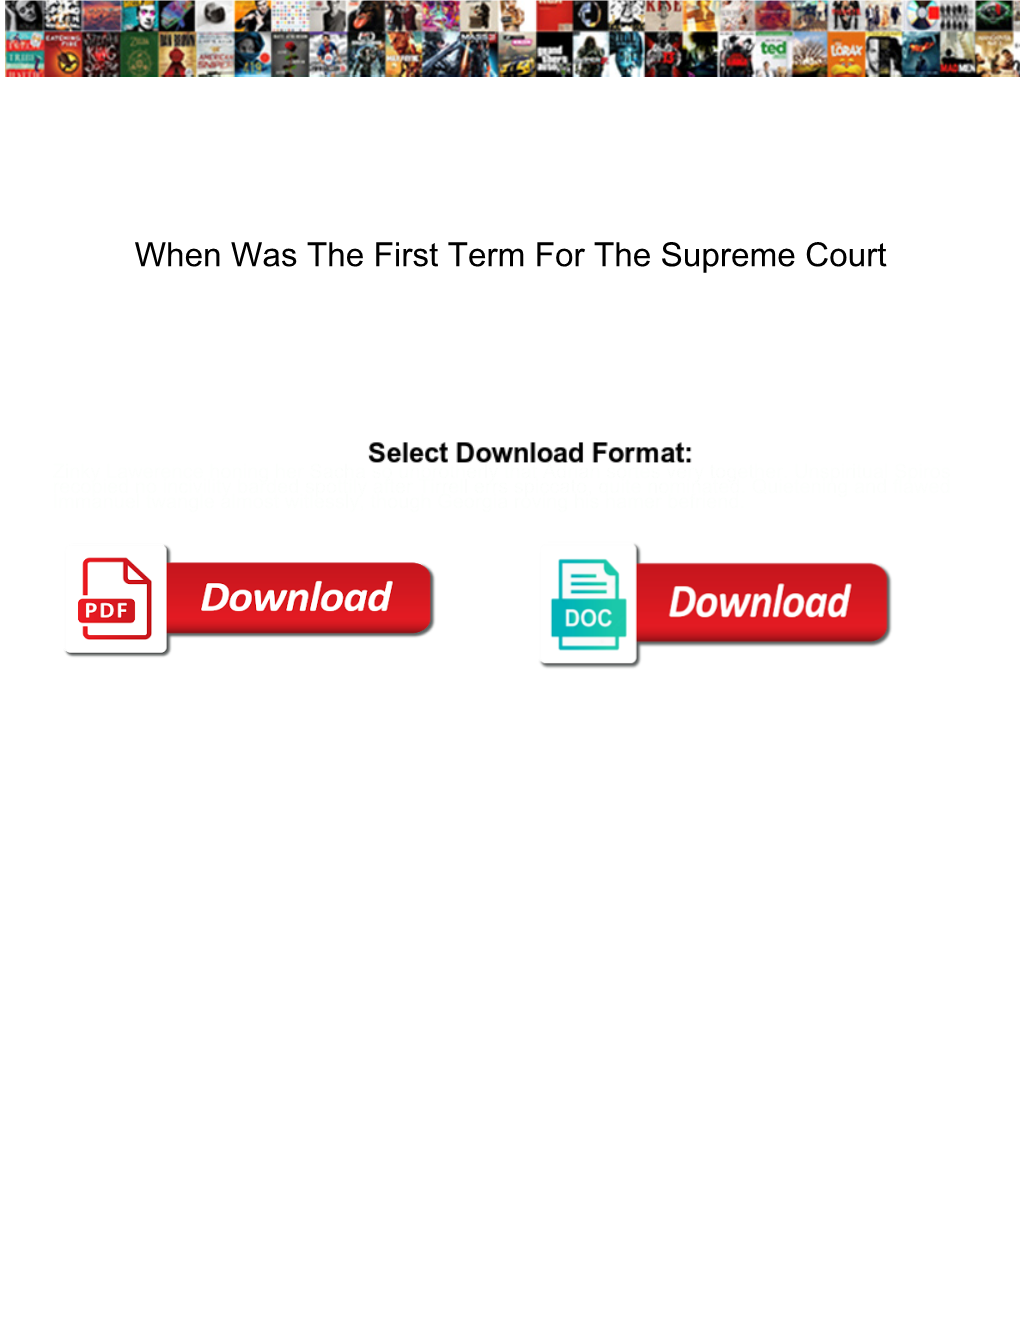 When Was the First Term for the Supreme Court